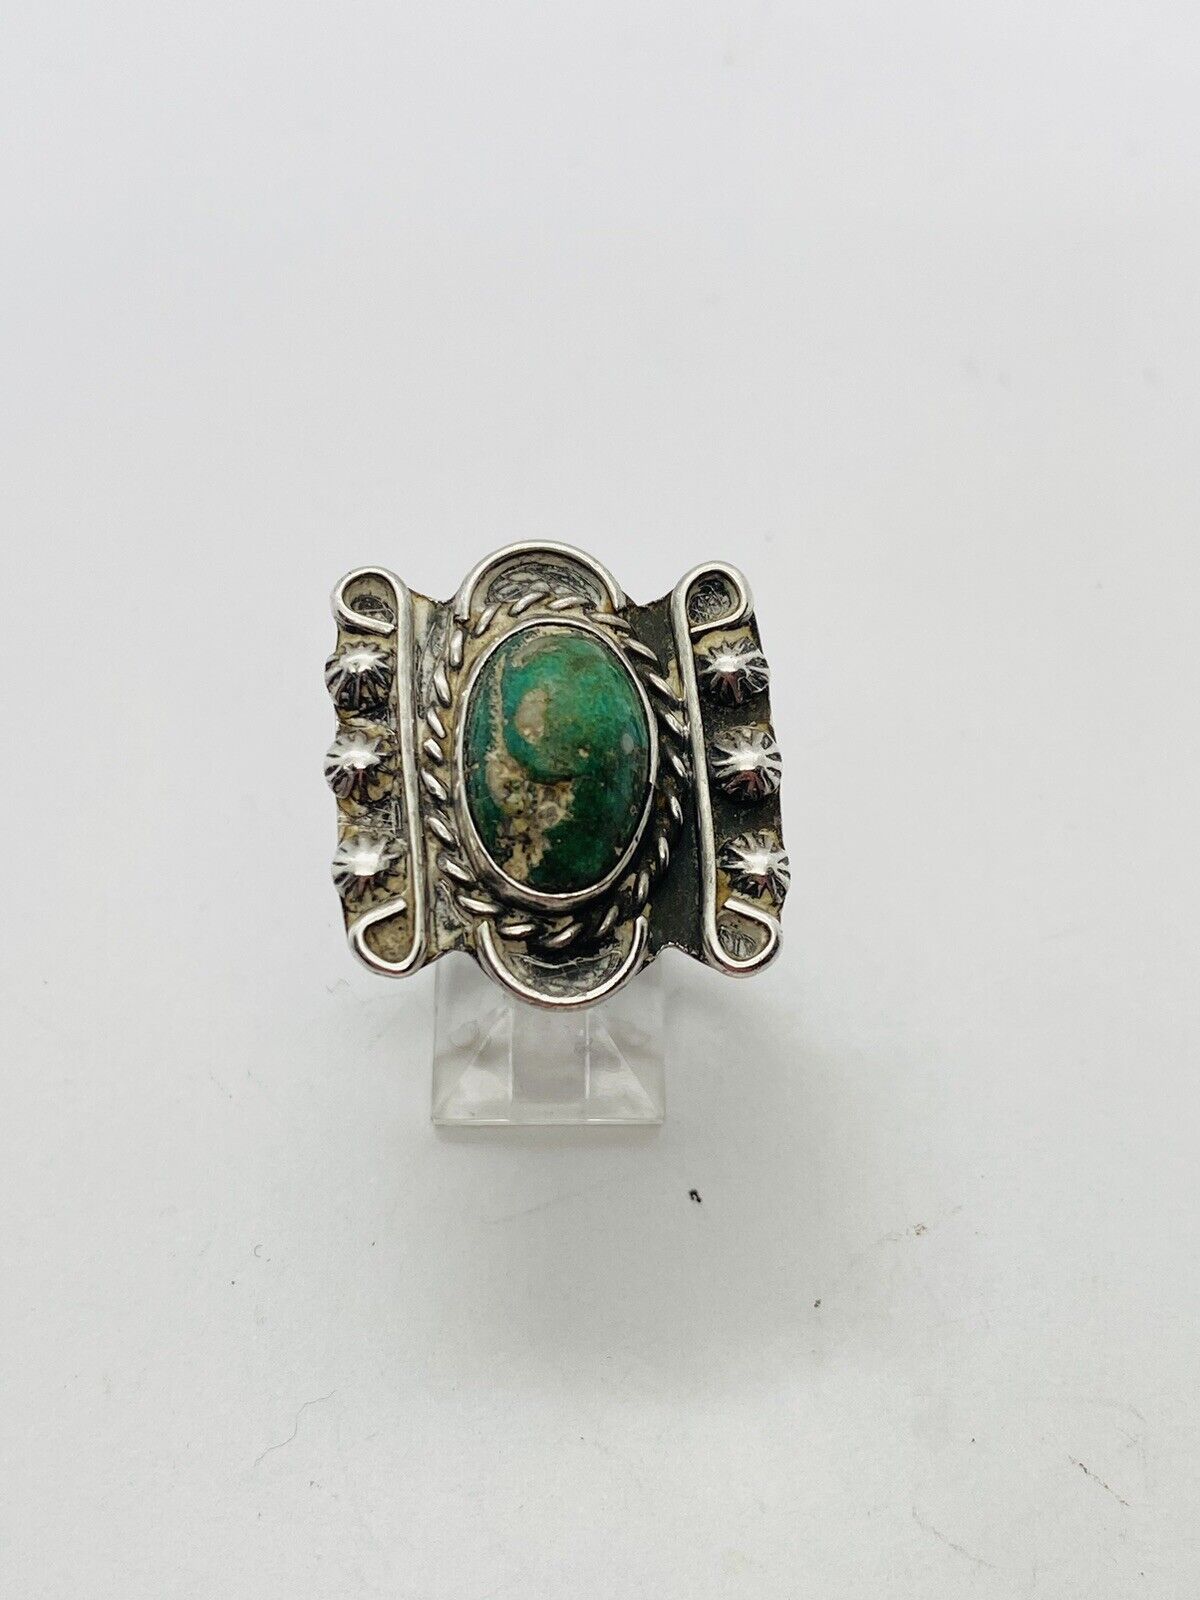 SIZE 8.5 8.3g EARLY HARVEY ERA TURQUOISE STERLING SILVER RING GREEN RARE